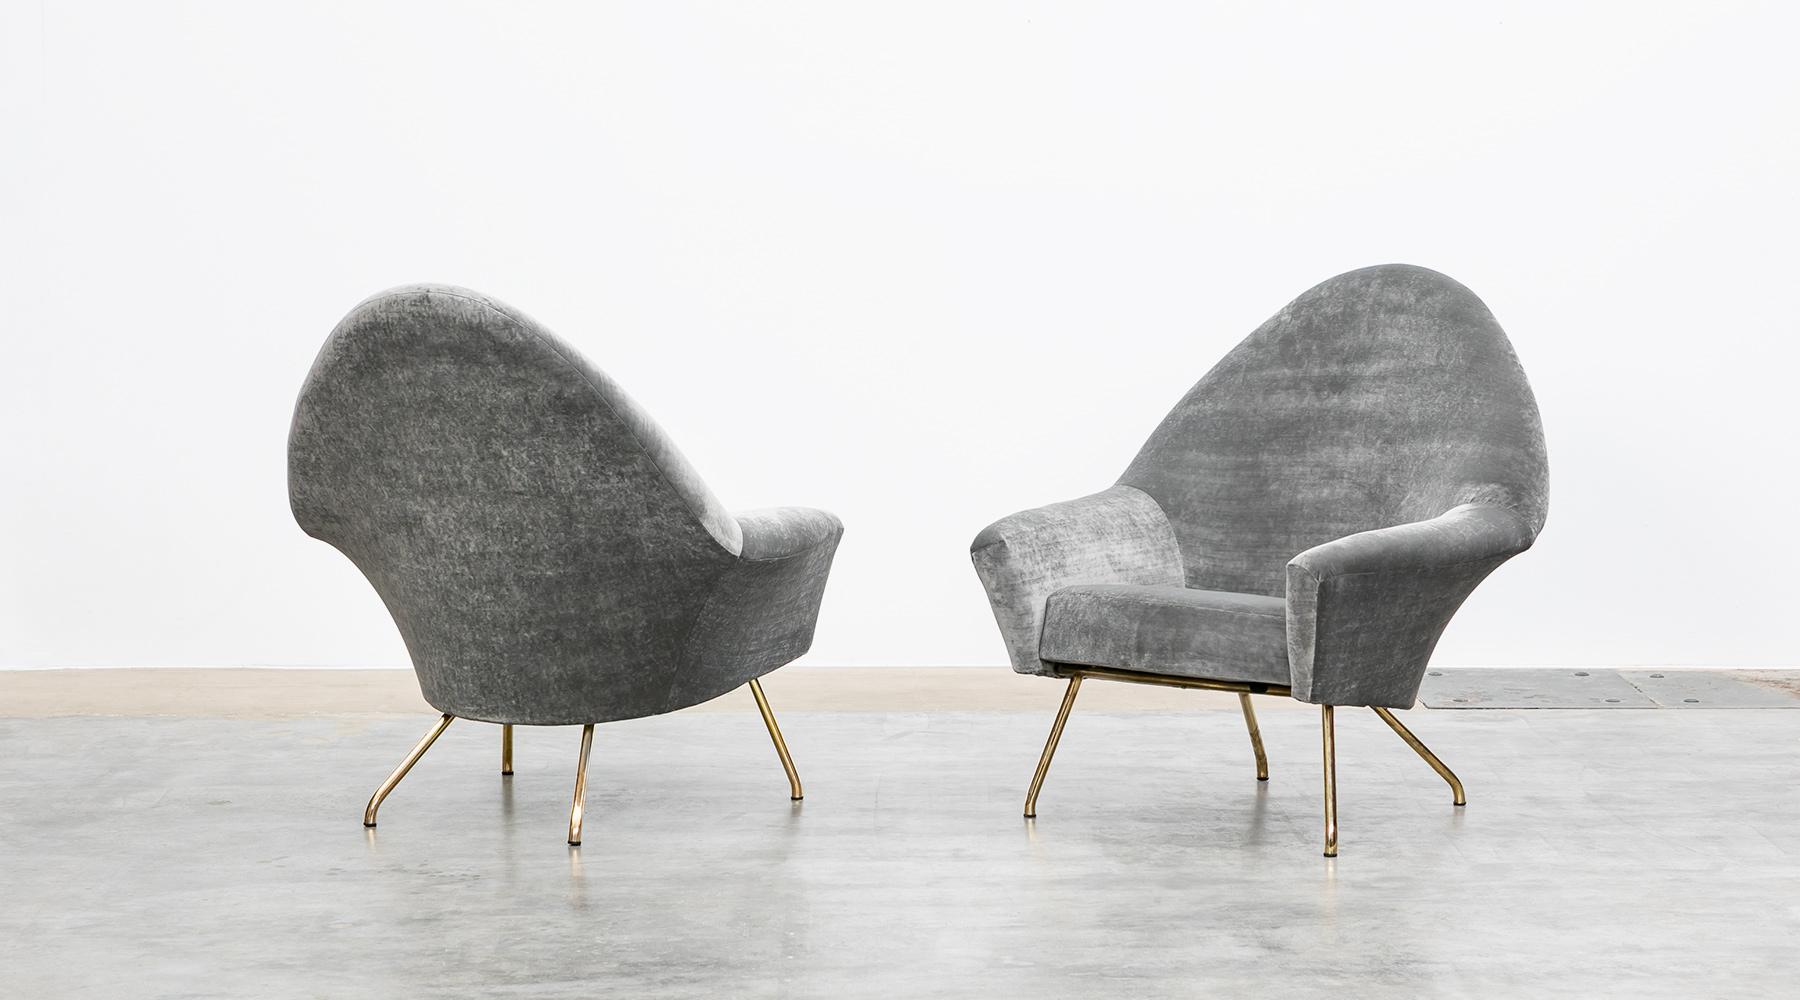 New upholstery in grey high-quality fabric, lounge chairs by Joseph-André Motte, France, 1955.

These two lounge chairs from 1955, designed by French Joseph-André Motte, are timeless in shape and aesthetics. Organically shaped seat shell countered